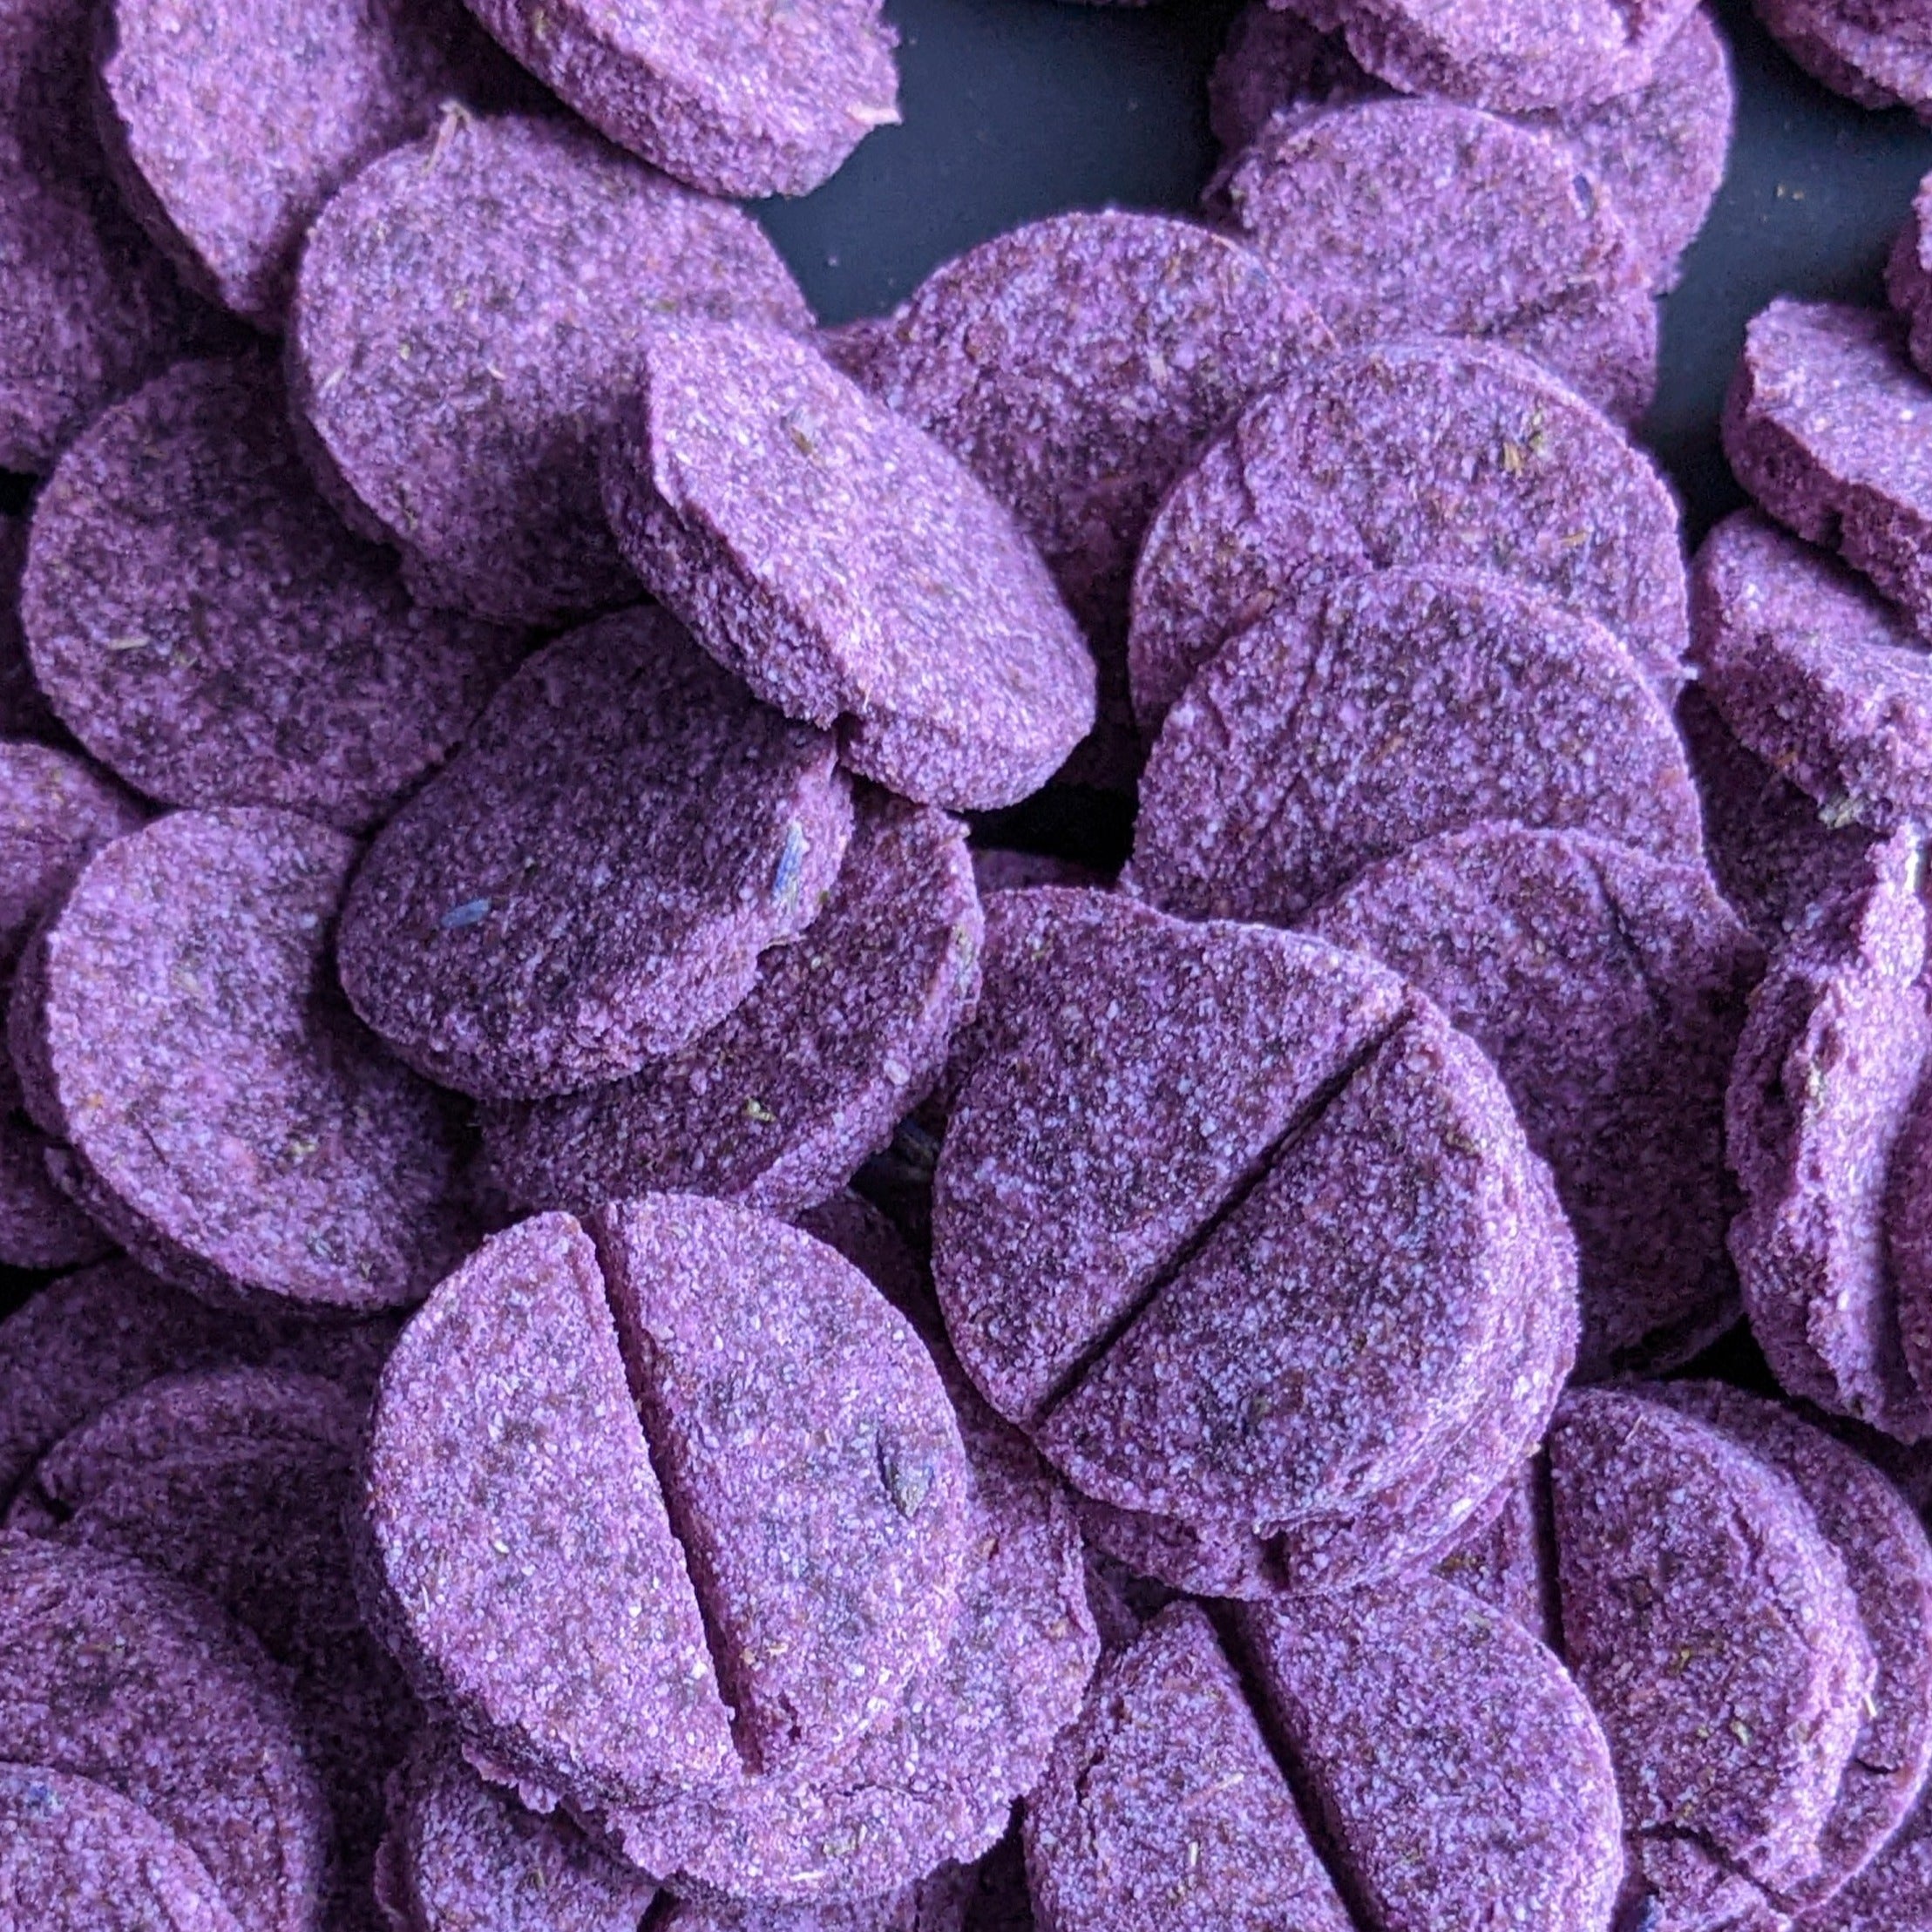 CHESTER'S Calming Dog Treats: Natural relief for stress & anxiety! Lavender, chamomile, & blue vervain. Delicious, healthy, chill vibes for Fido. Order now!